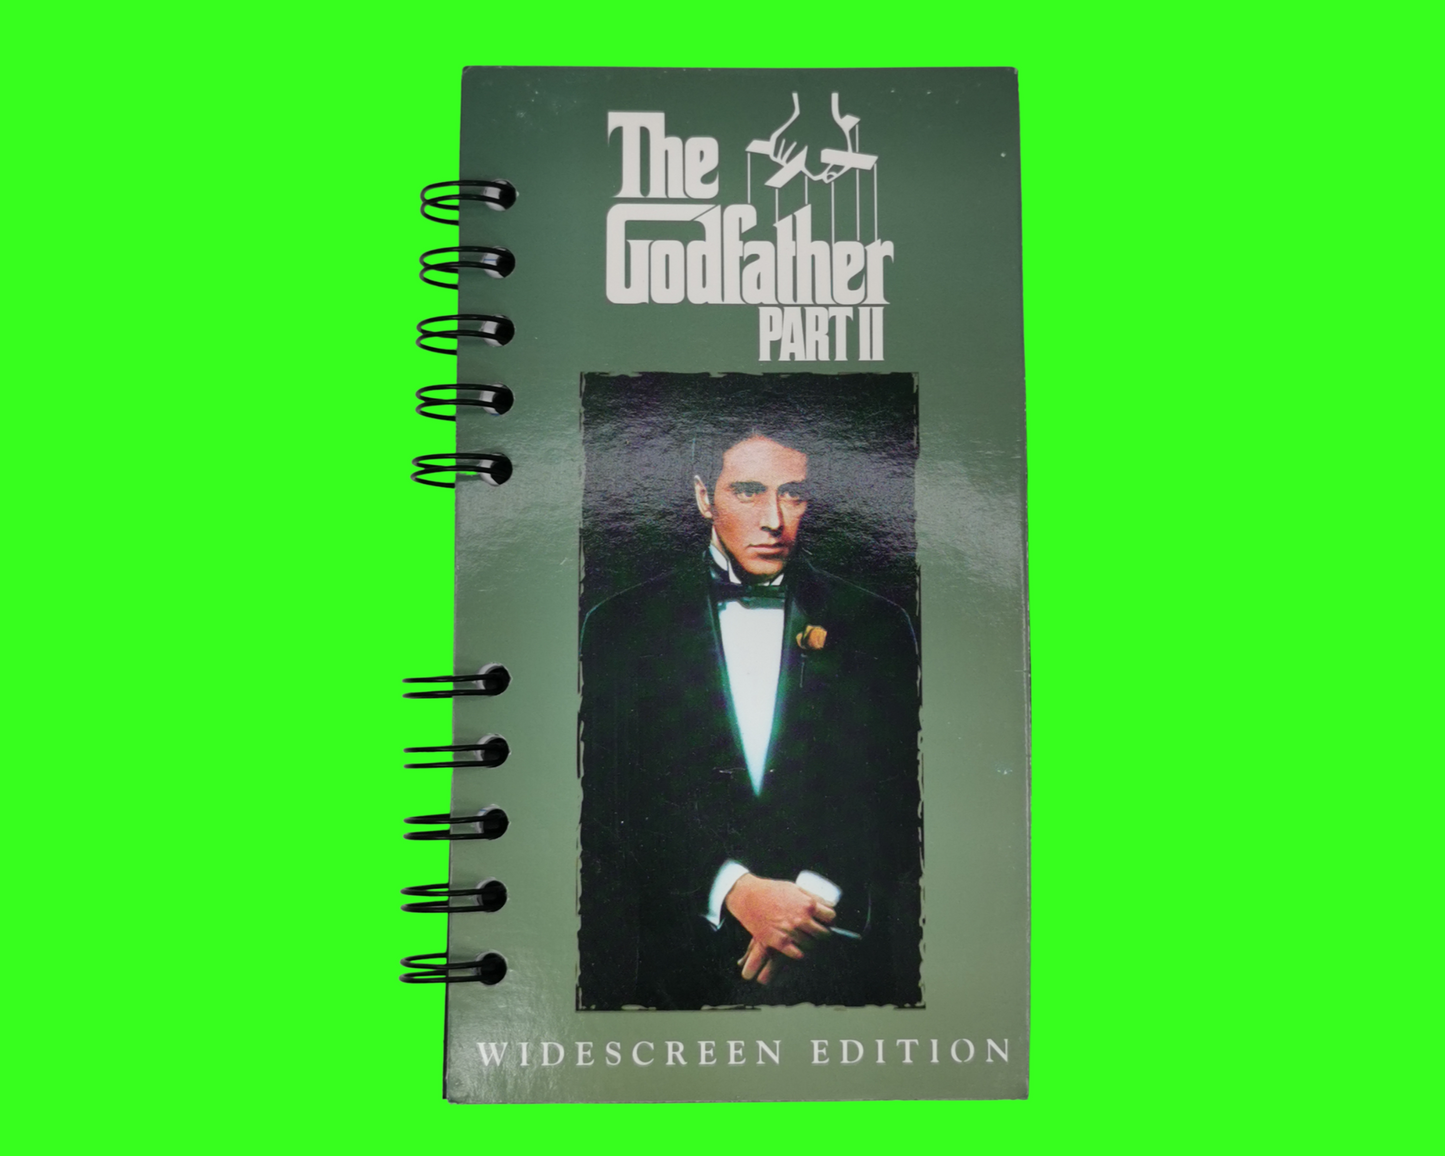 The Godfather Part II VHS Movie Notebook